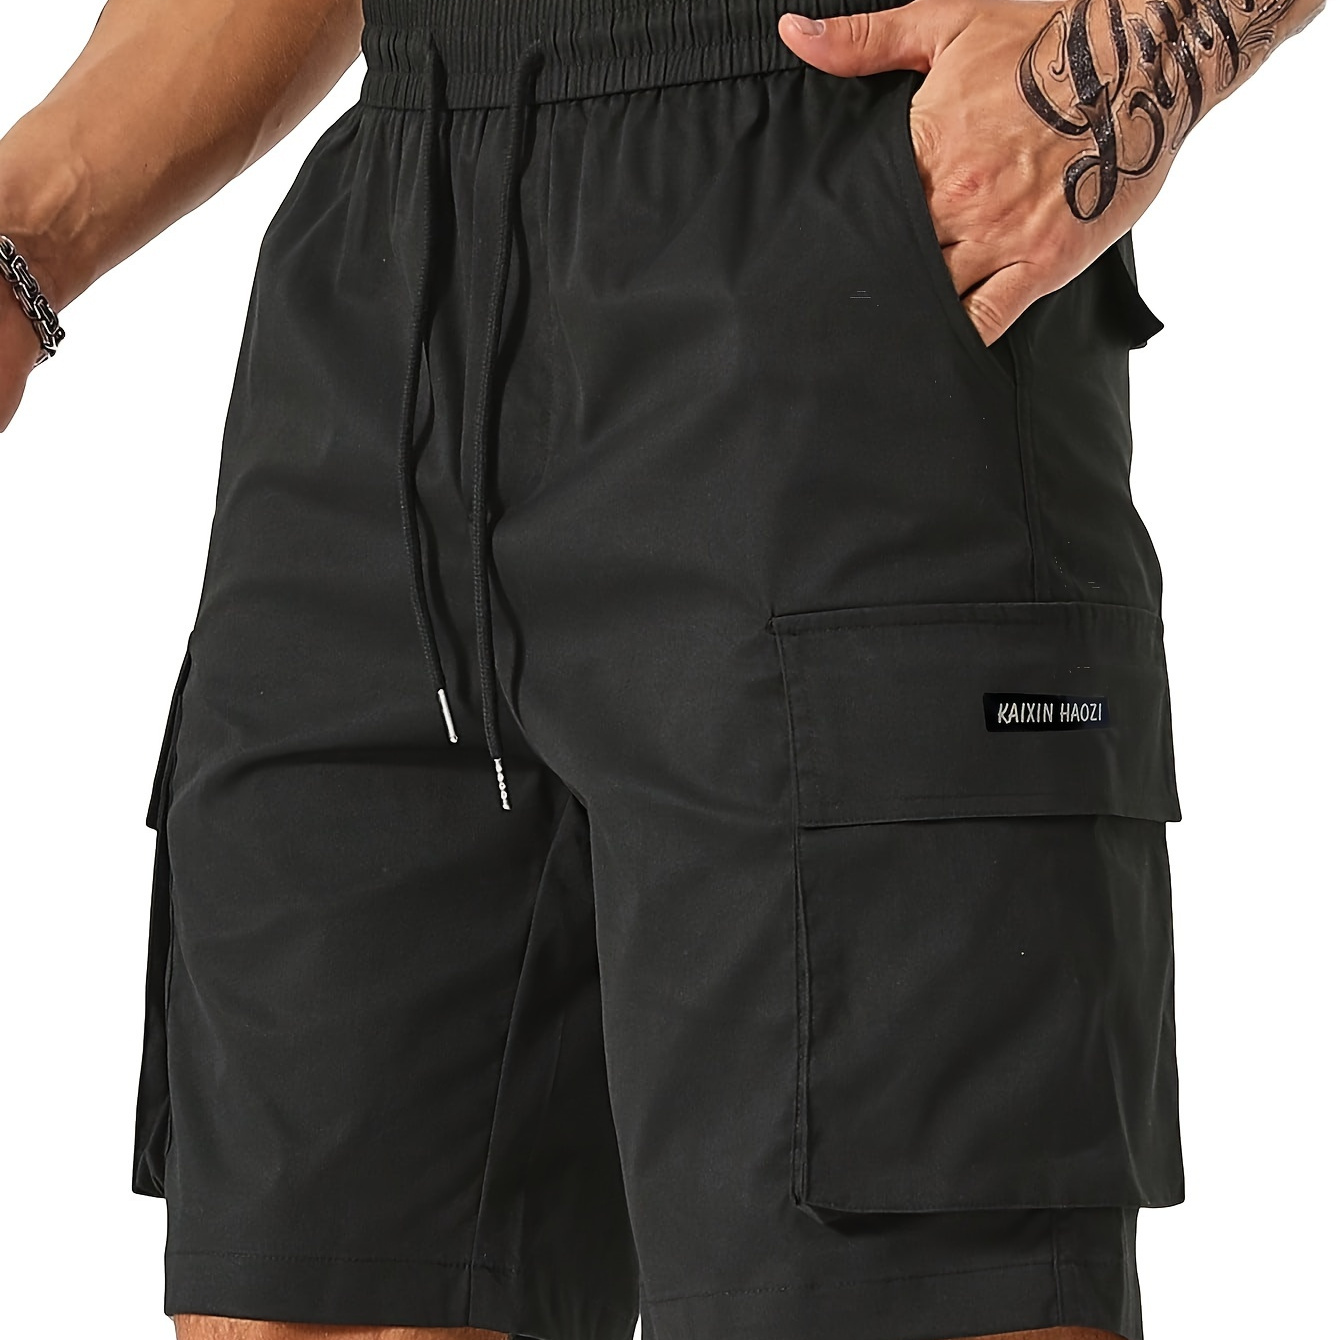 

Chic Design Men's Cargo Shorts In Solid Color With Multiple Flap Pockets, Versatile And Casual Drawstring Shorts For Summer Outdoors Activities